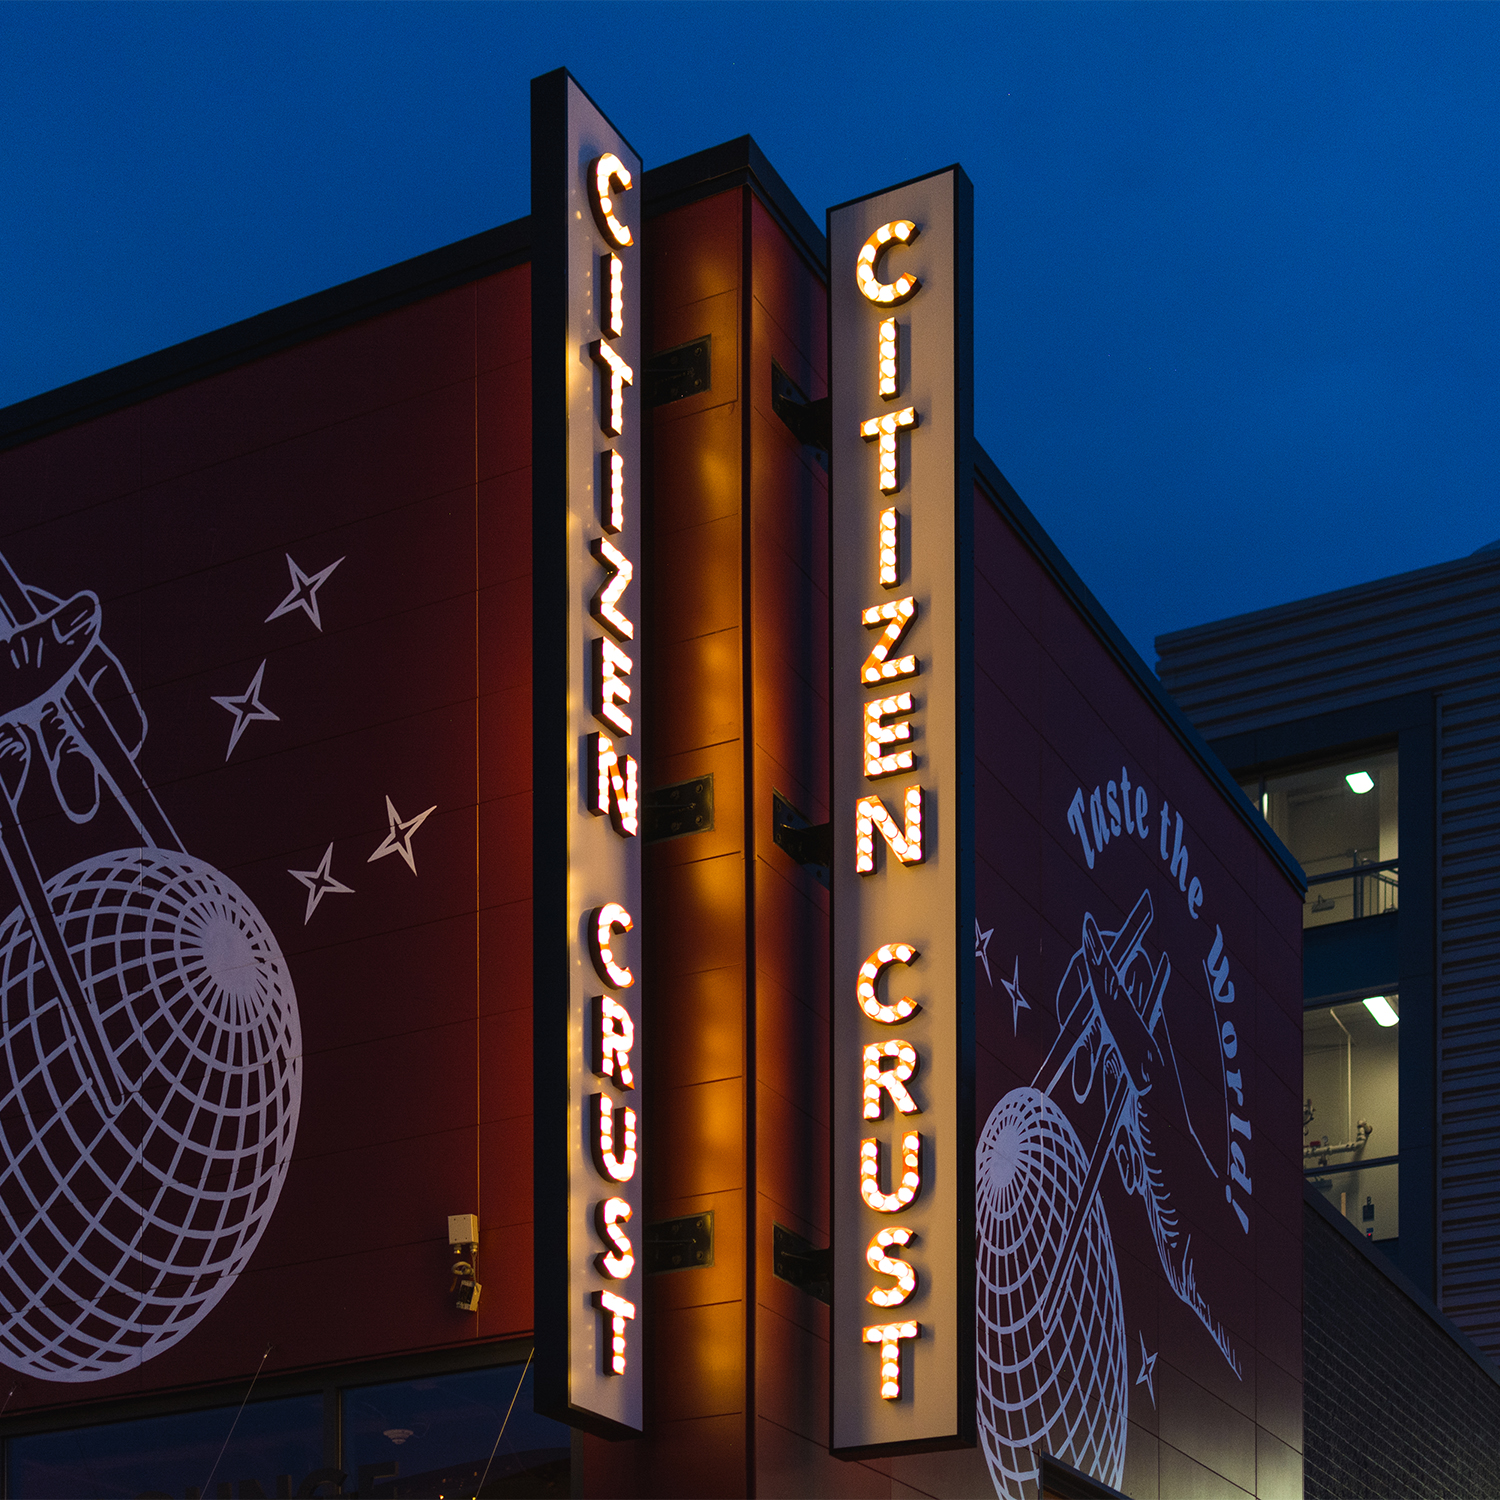 Citizen Crust Sign at Night